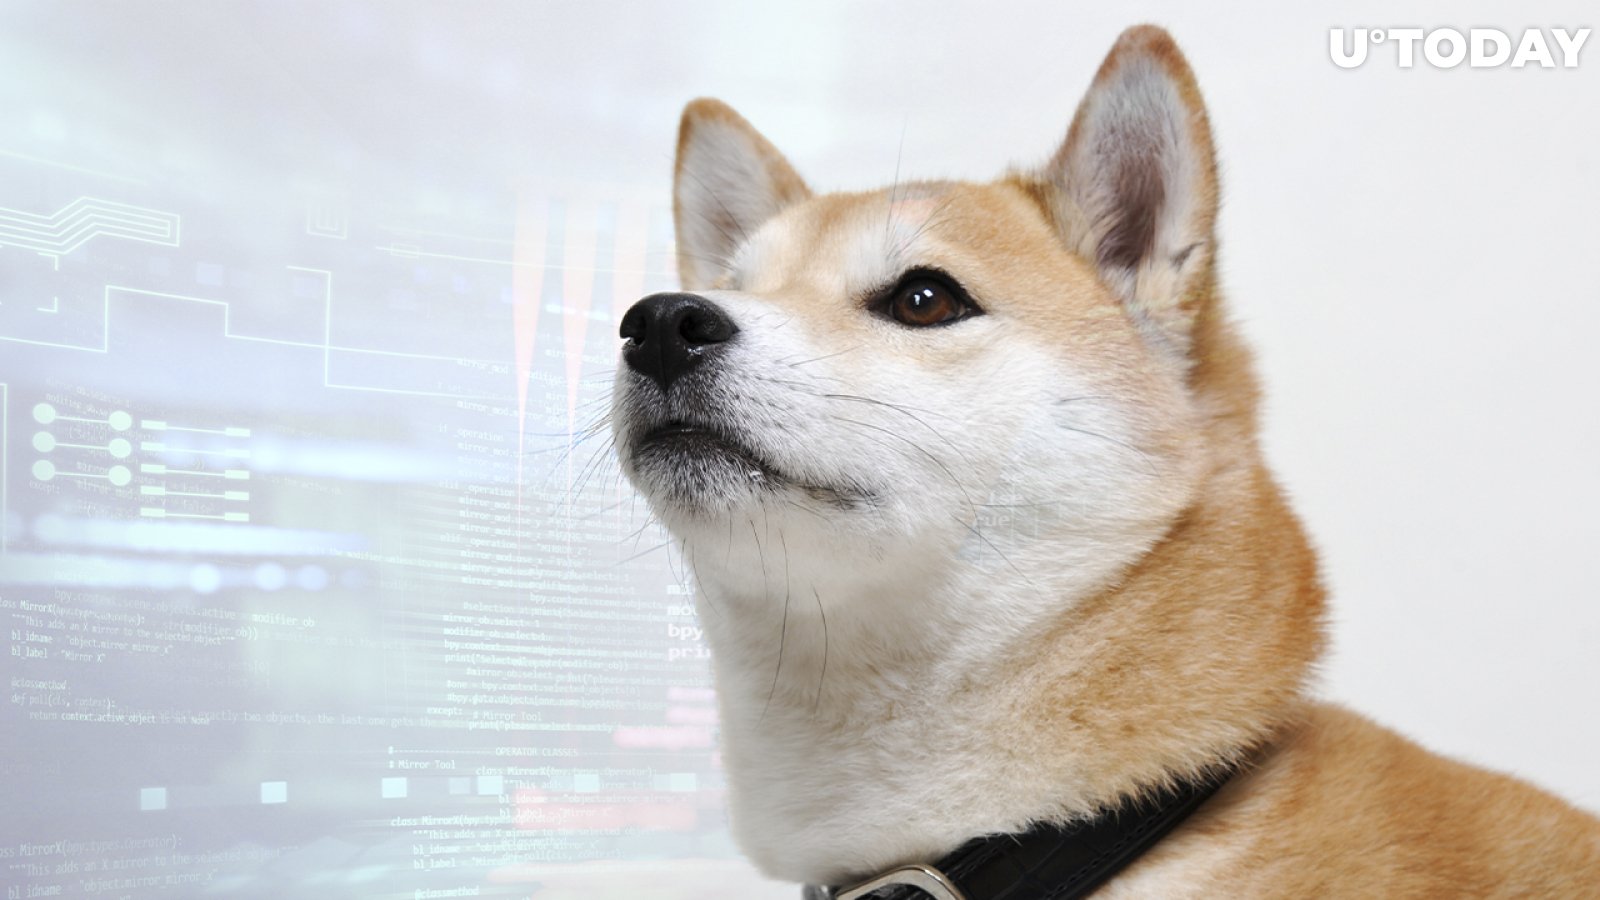 SHIB Price Hints at Incoming Volatility, Holders Increase by Nearly 20,000